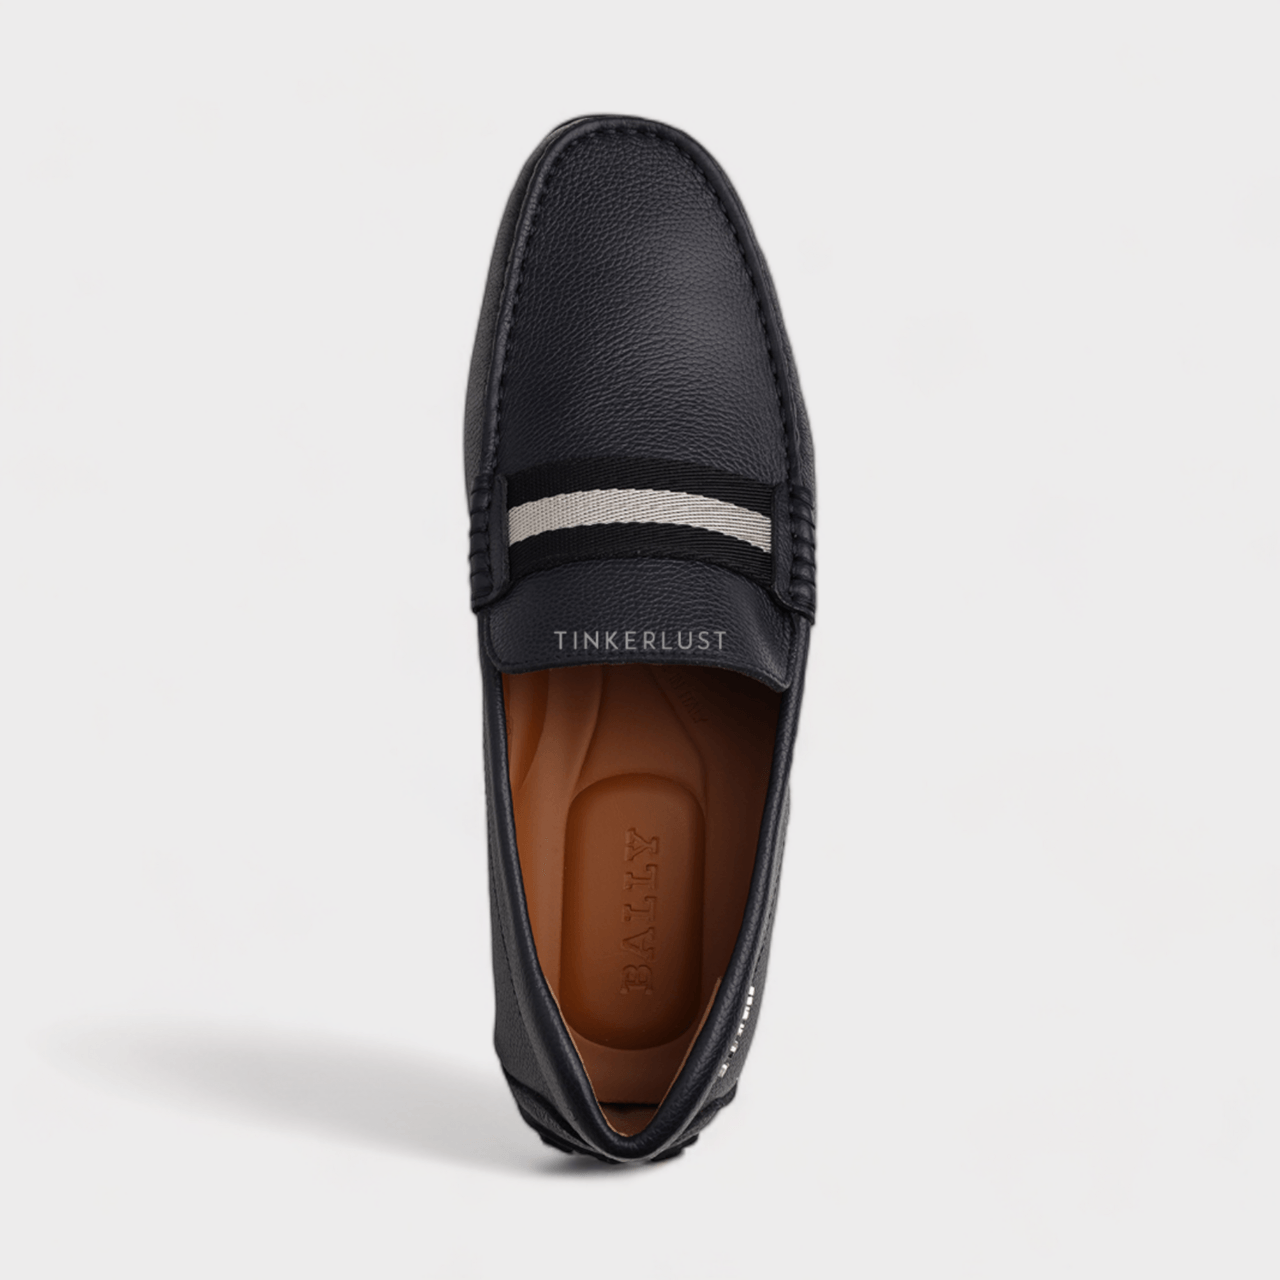 Bally Men Driver Pearce Loafers in Navy Blue with Trainspotting Stripe 